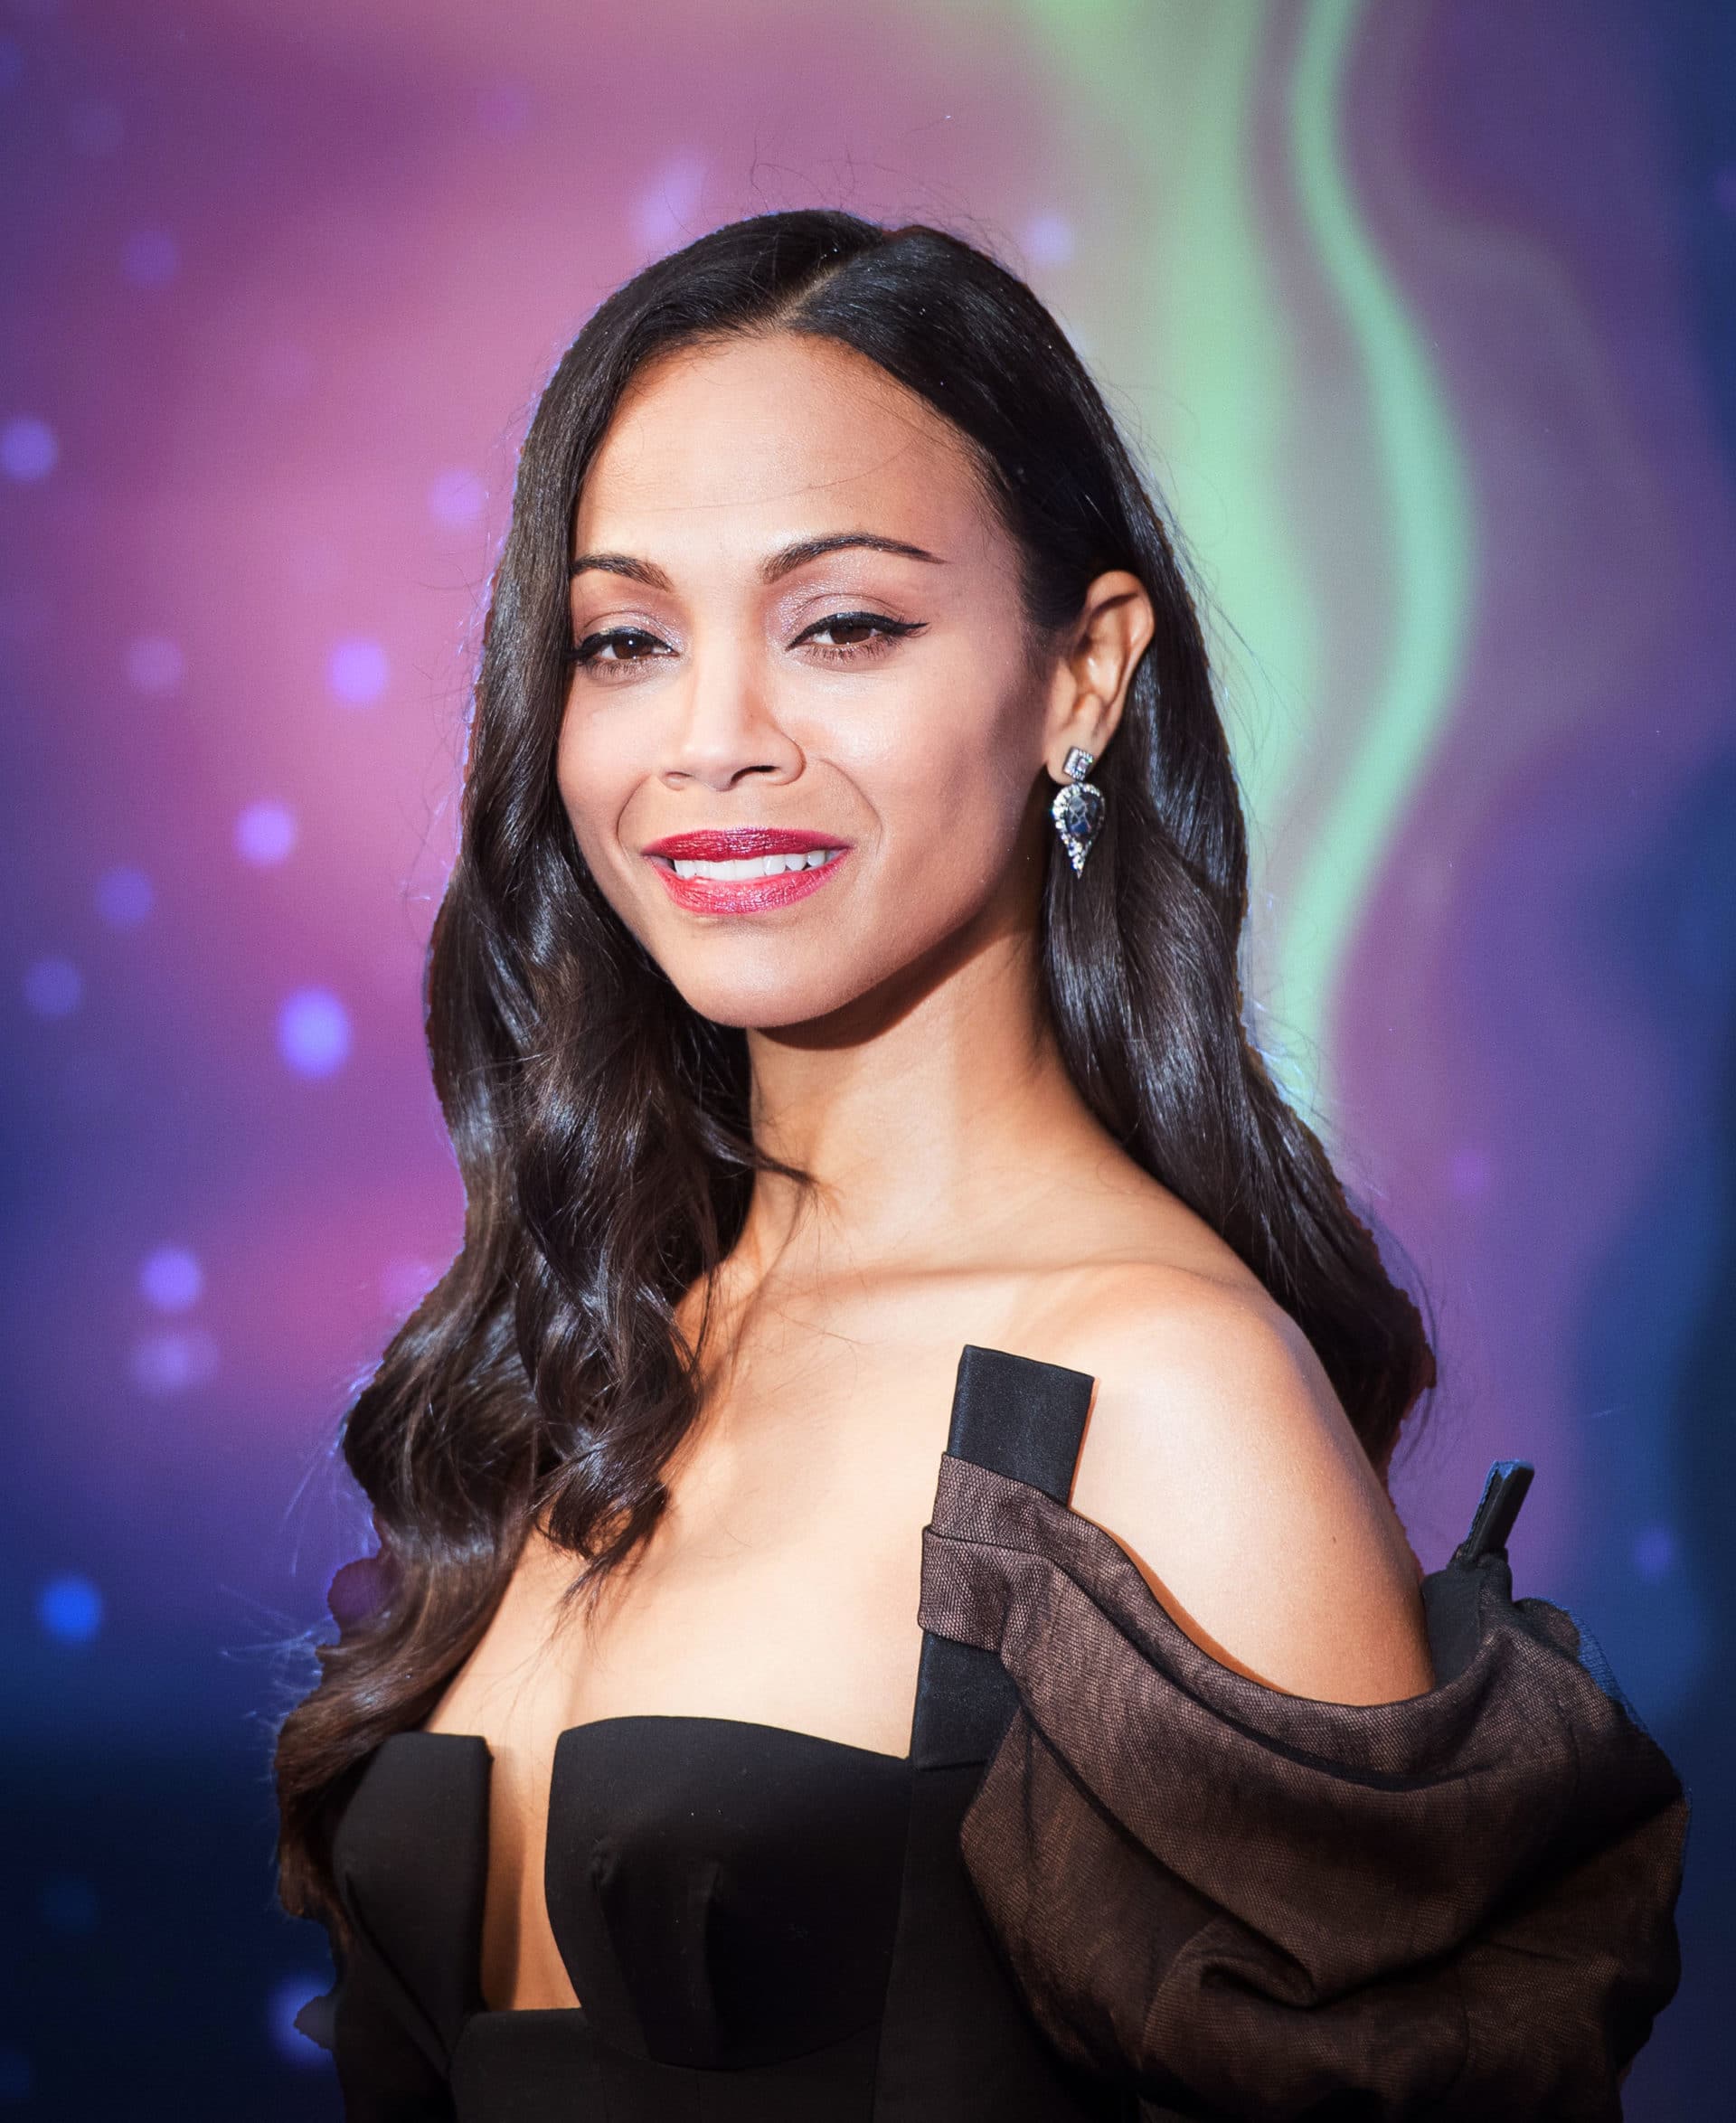 Zoe Saldana Explains How She’s Become ‘Limitless’ In Hollywood